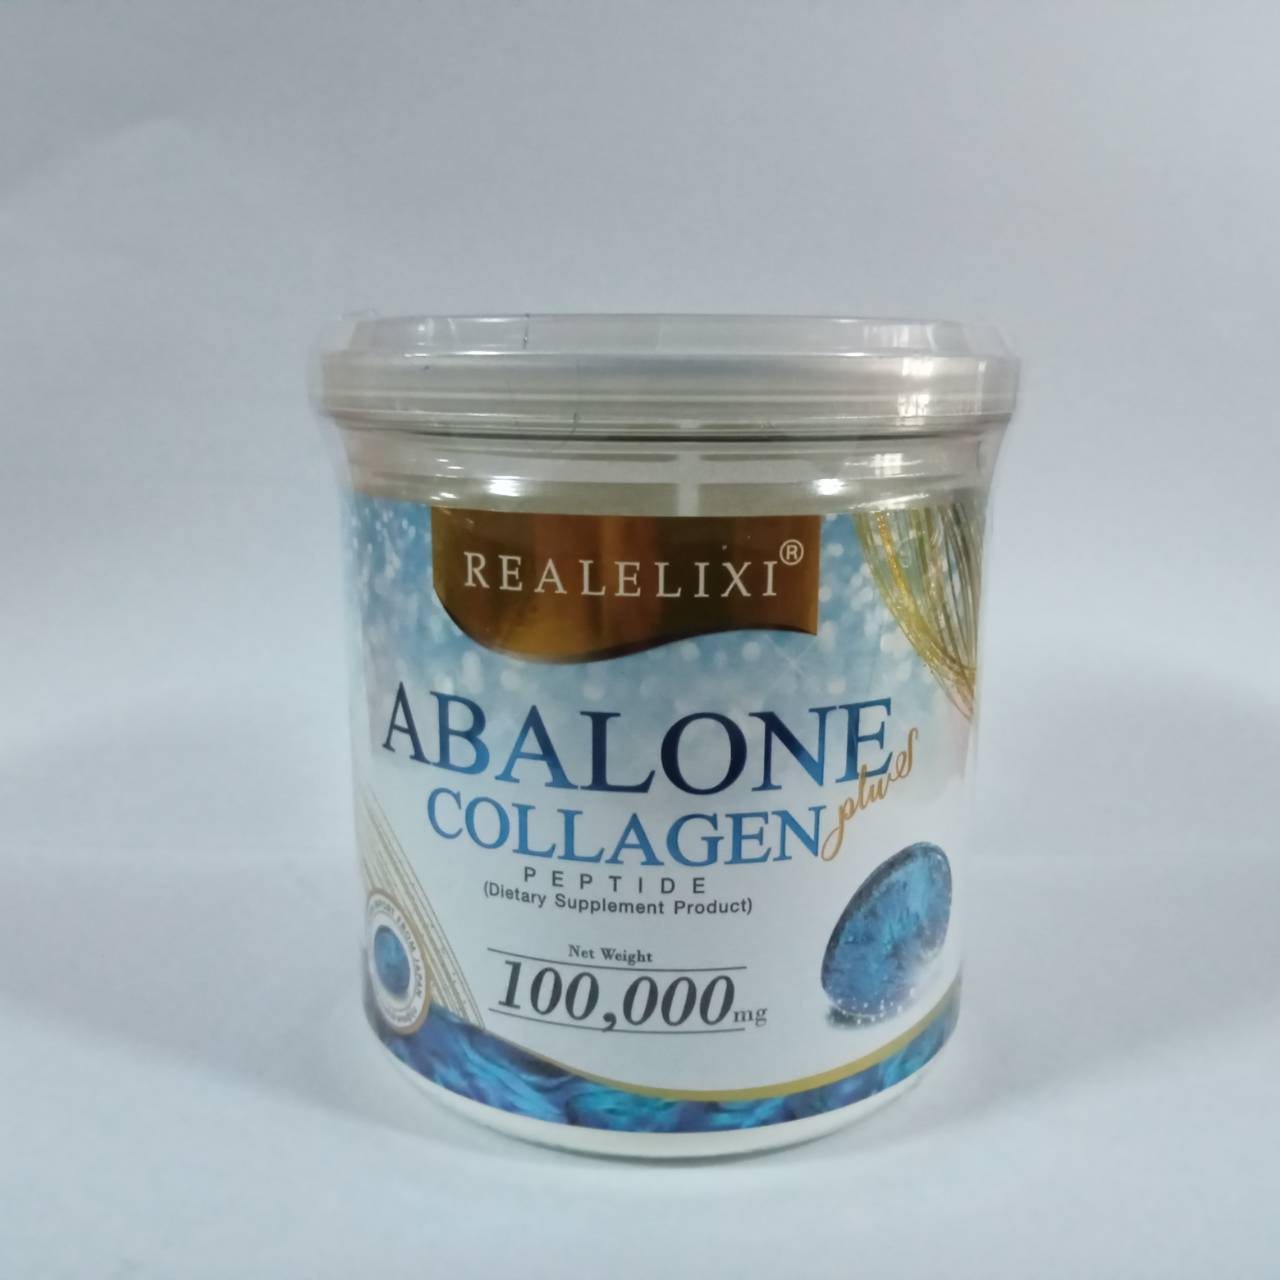 REALELIXIR ABALONE COLLAGEN PLUS 100,000MG. 100G.